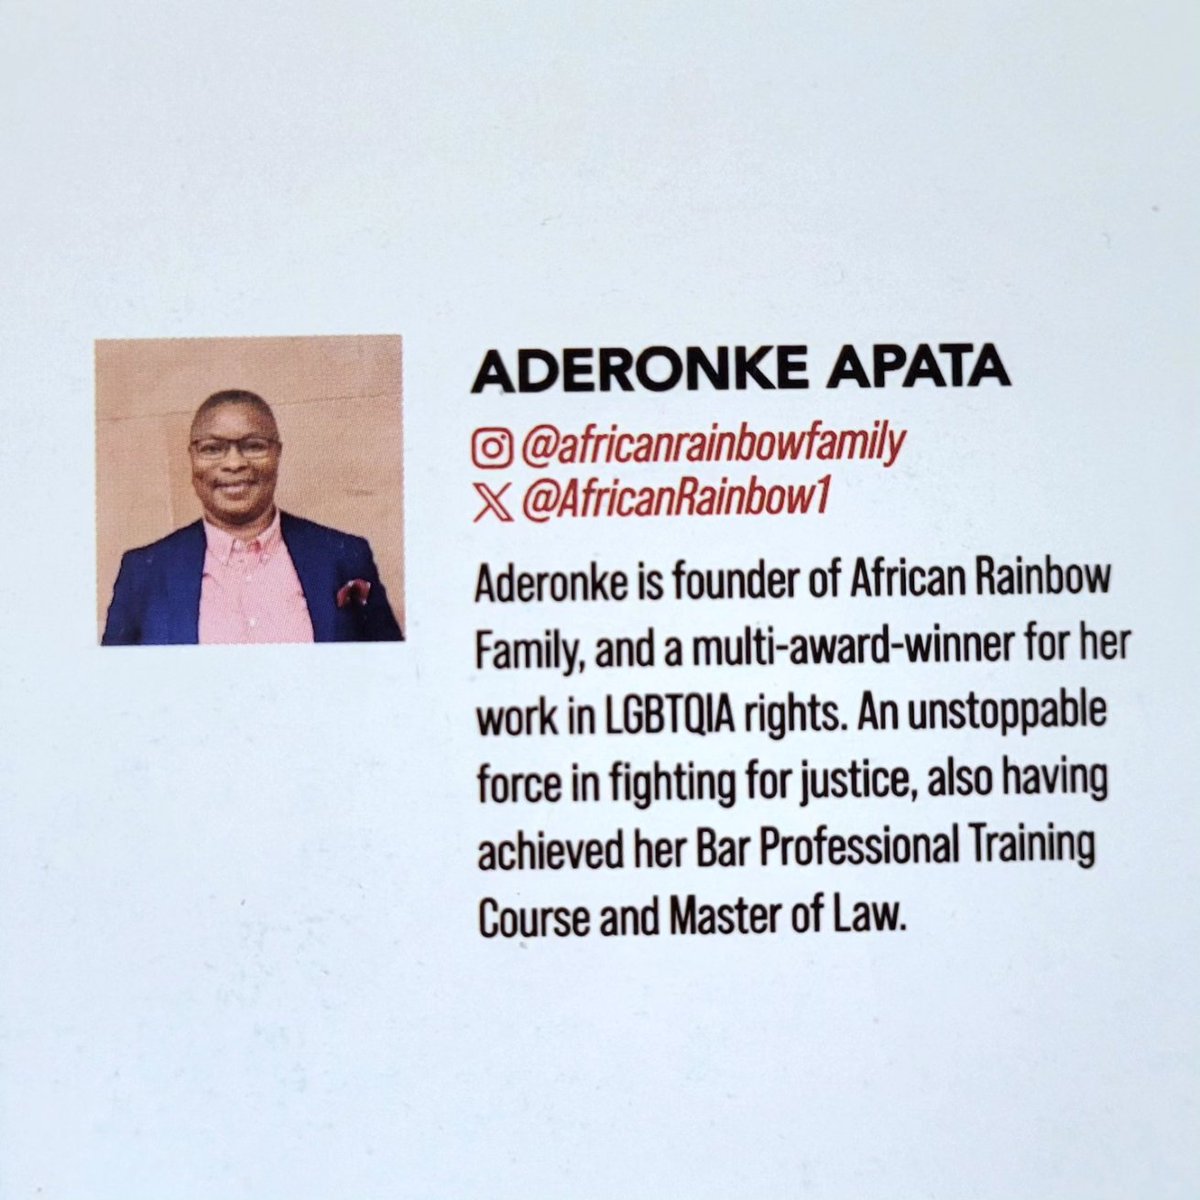 We are so pleased to see our Founder and CEO, Aderonke Apata, spotlighted in this incredible Black Lesbian Power List produced by UK Black Pride and DIVA for Lesbian Visibility Week ✊🏾🏳️‍🌈🏳️‍⚧️